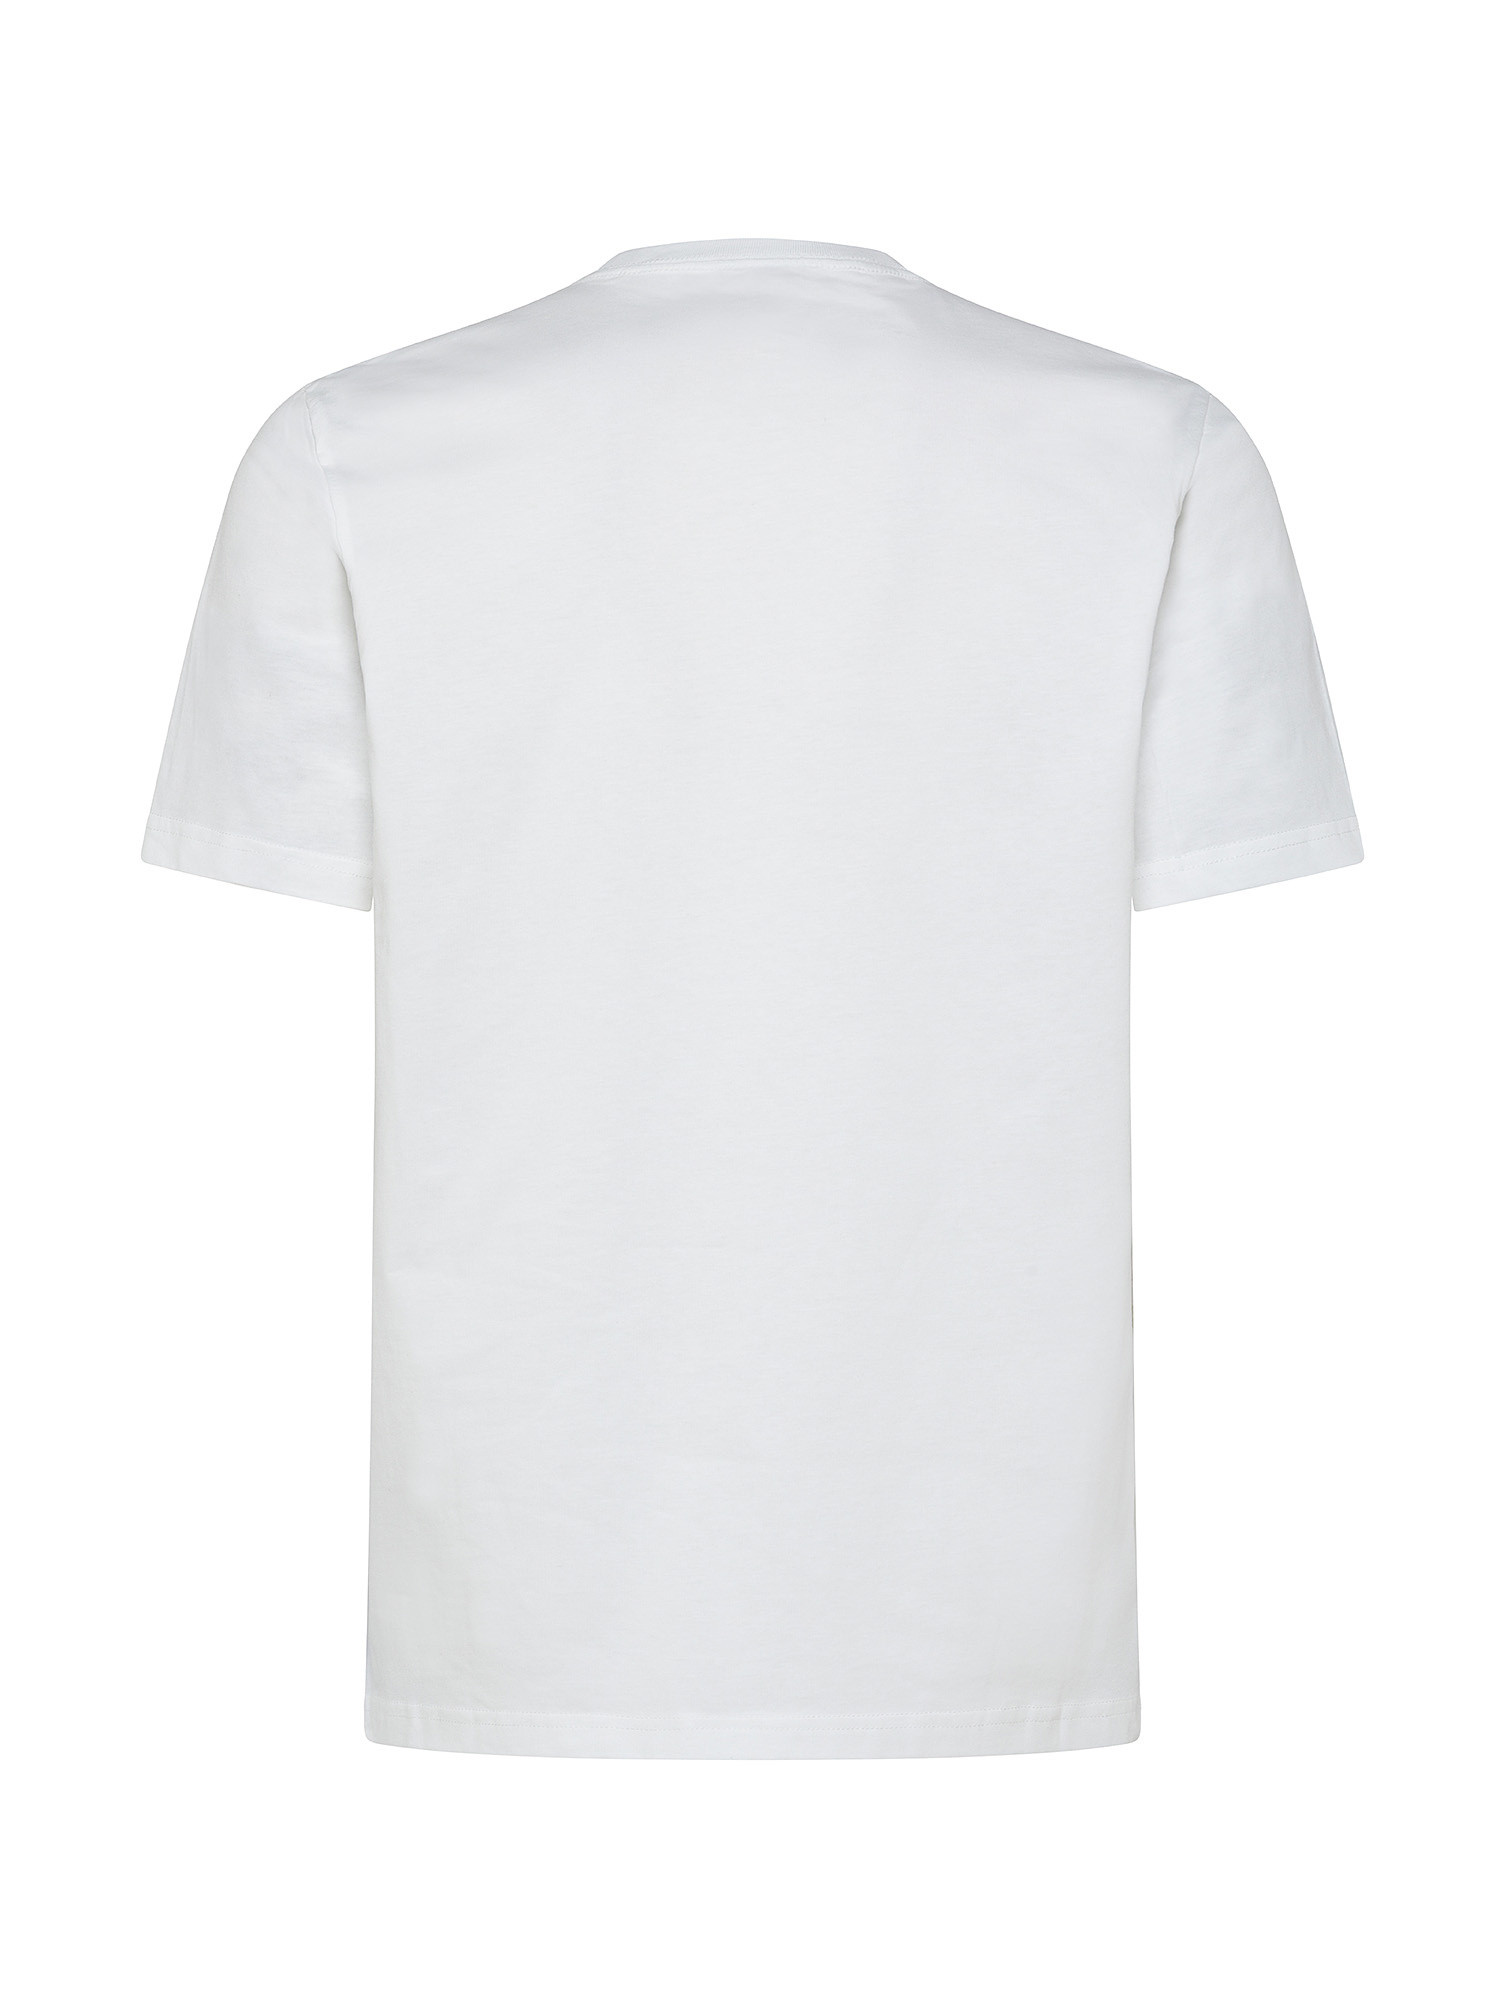 Paul Smith - Cotton T-shirt with bottle cap print, White, large image number 1